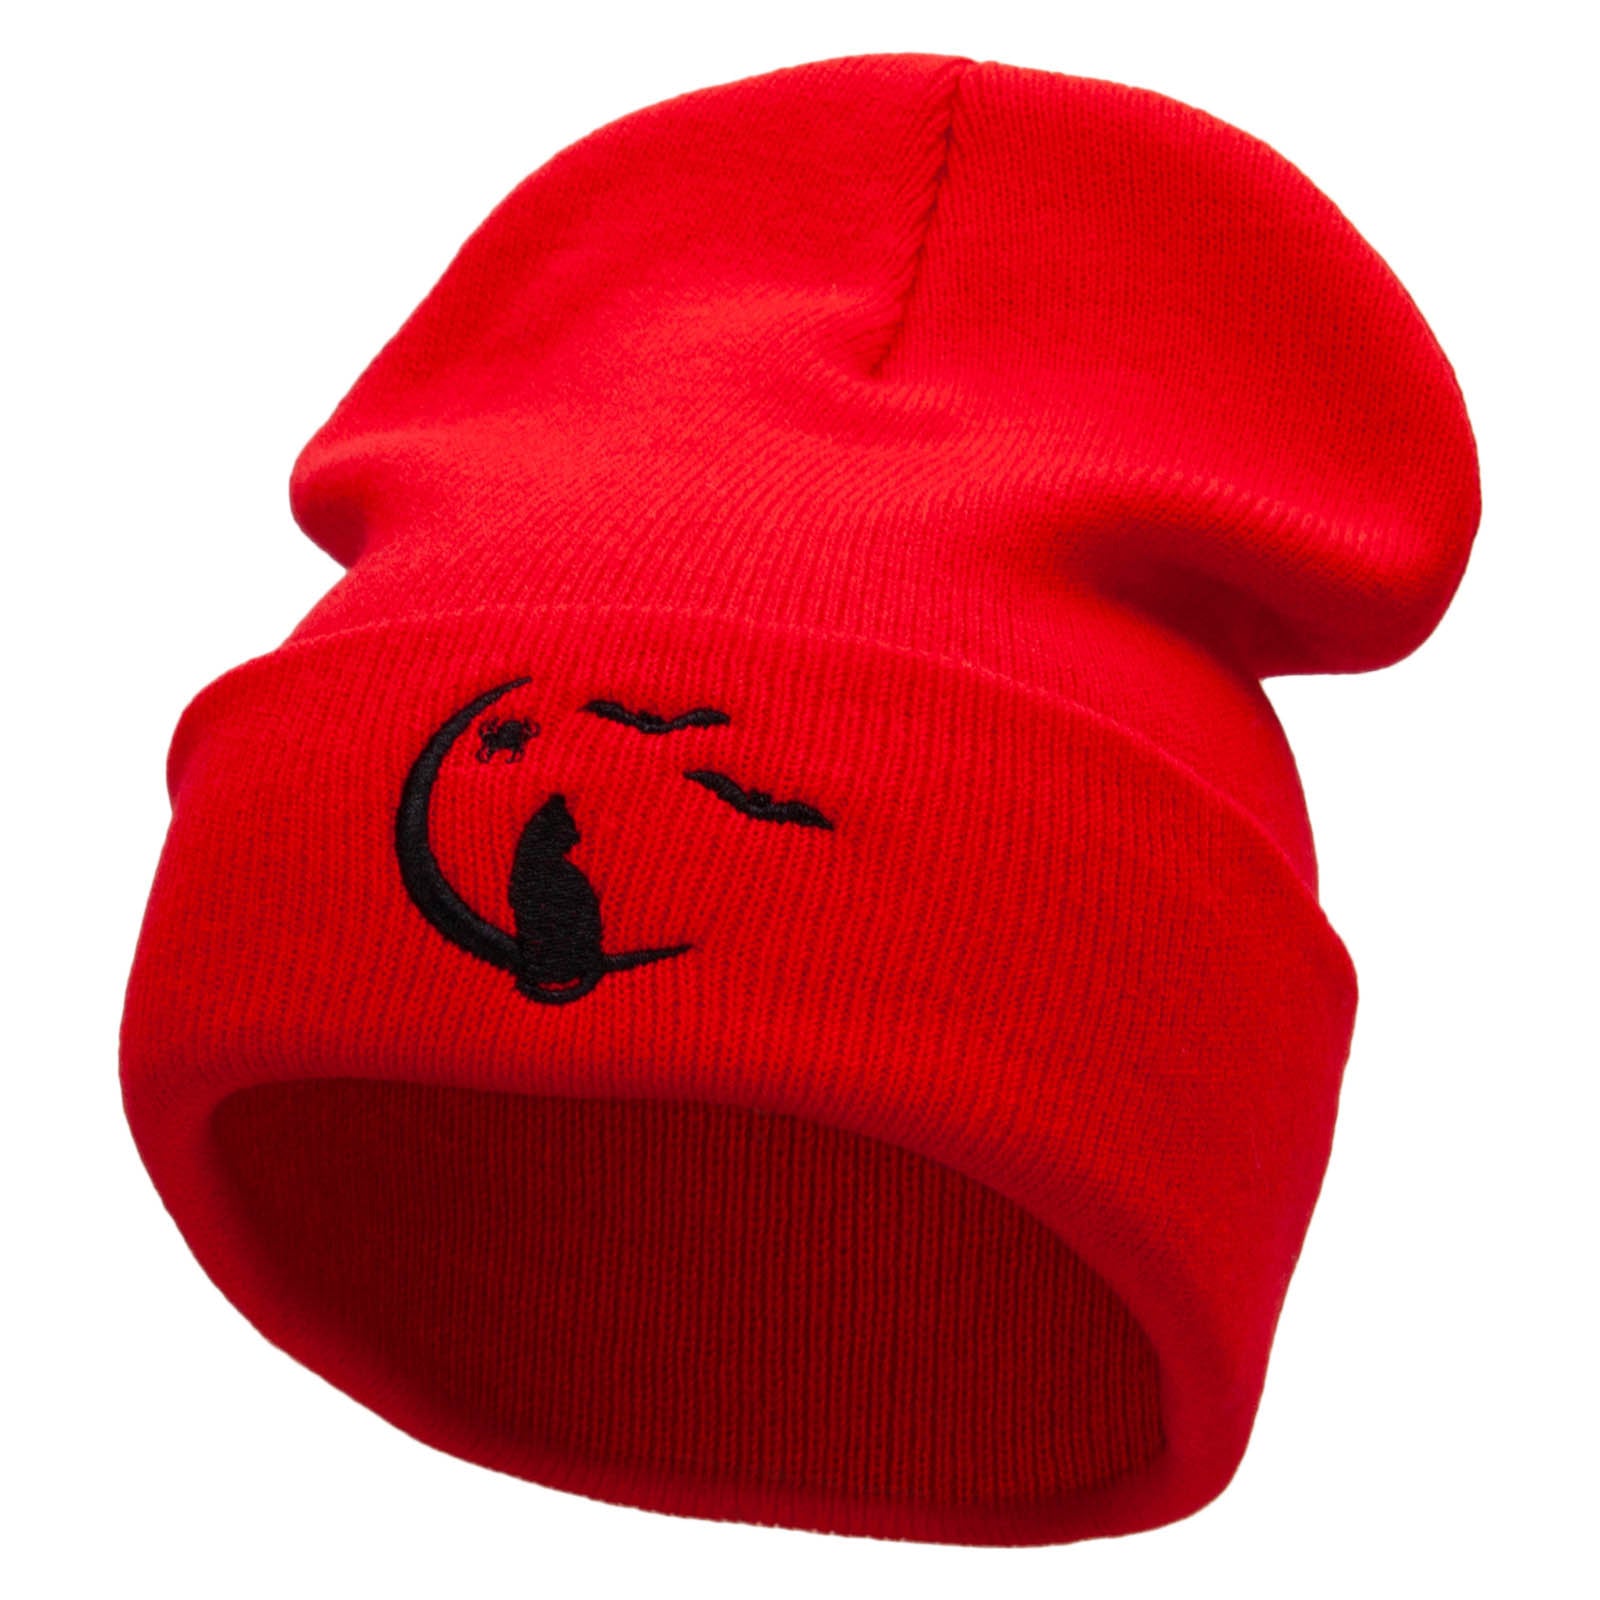 Moonlight Cat Embroidered 12 Inch Long Knitted Beanie - Red OSFM